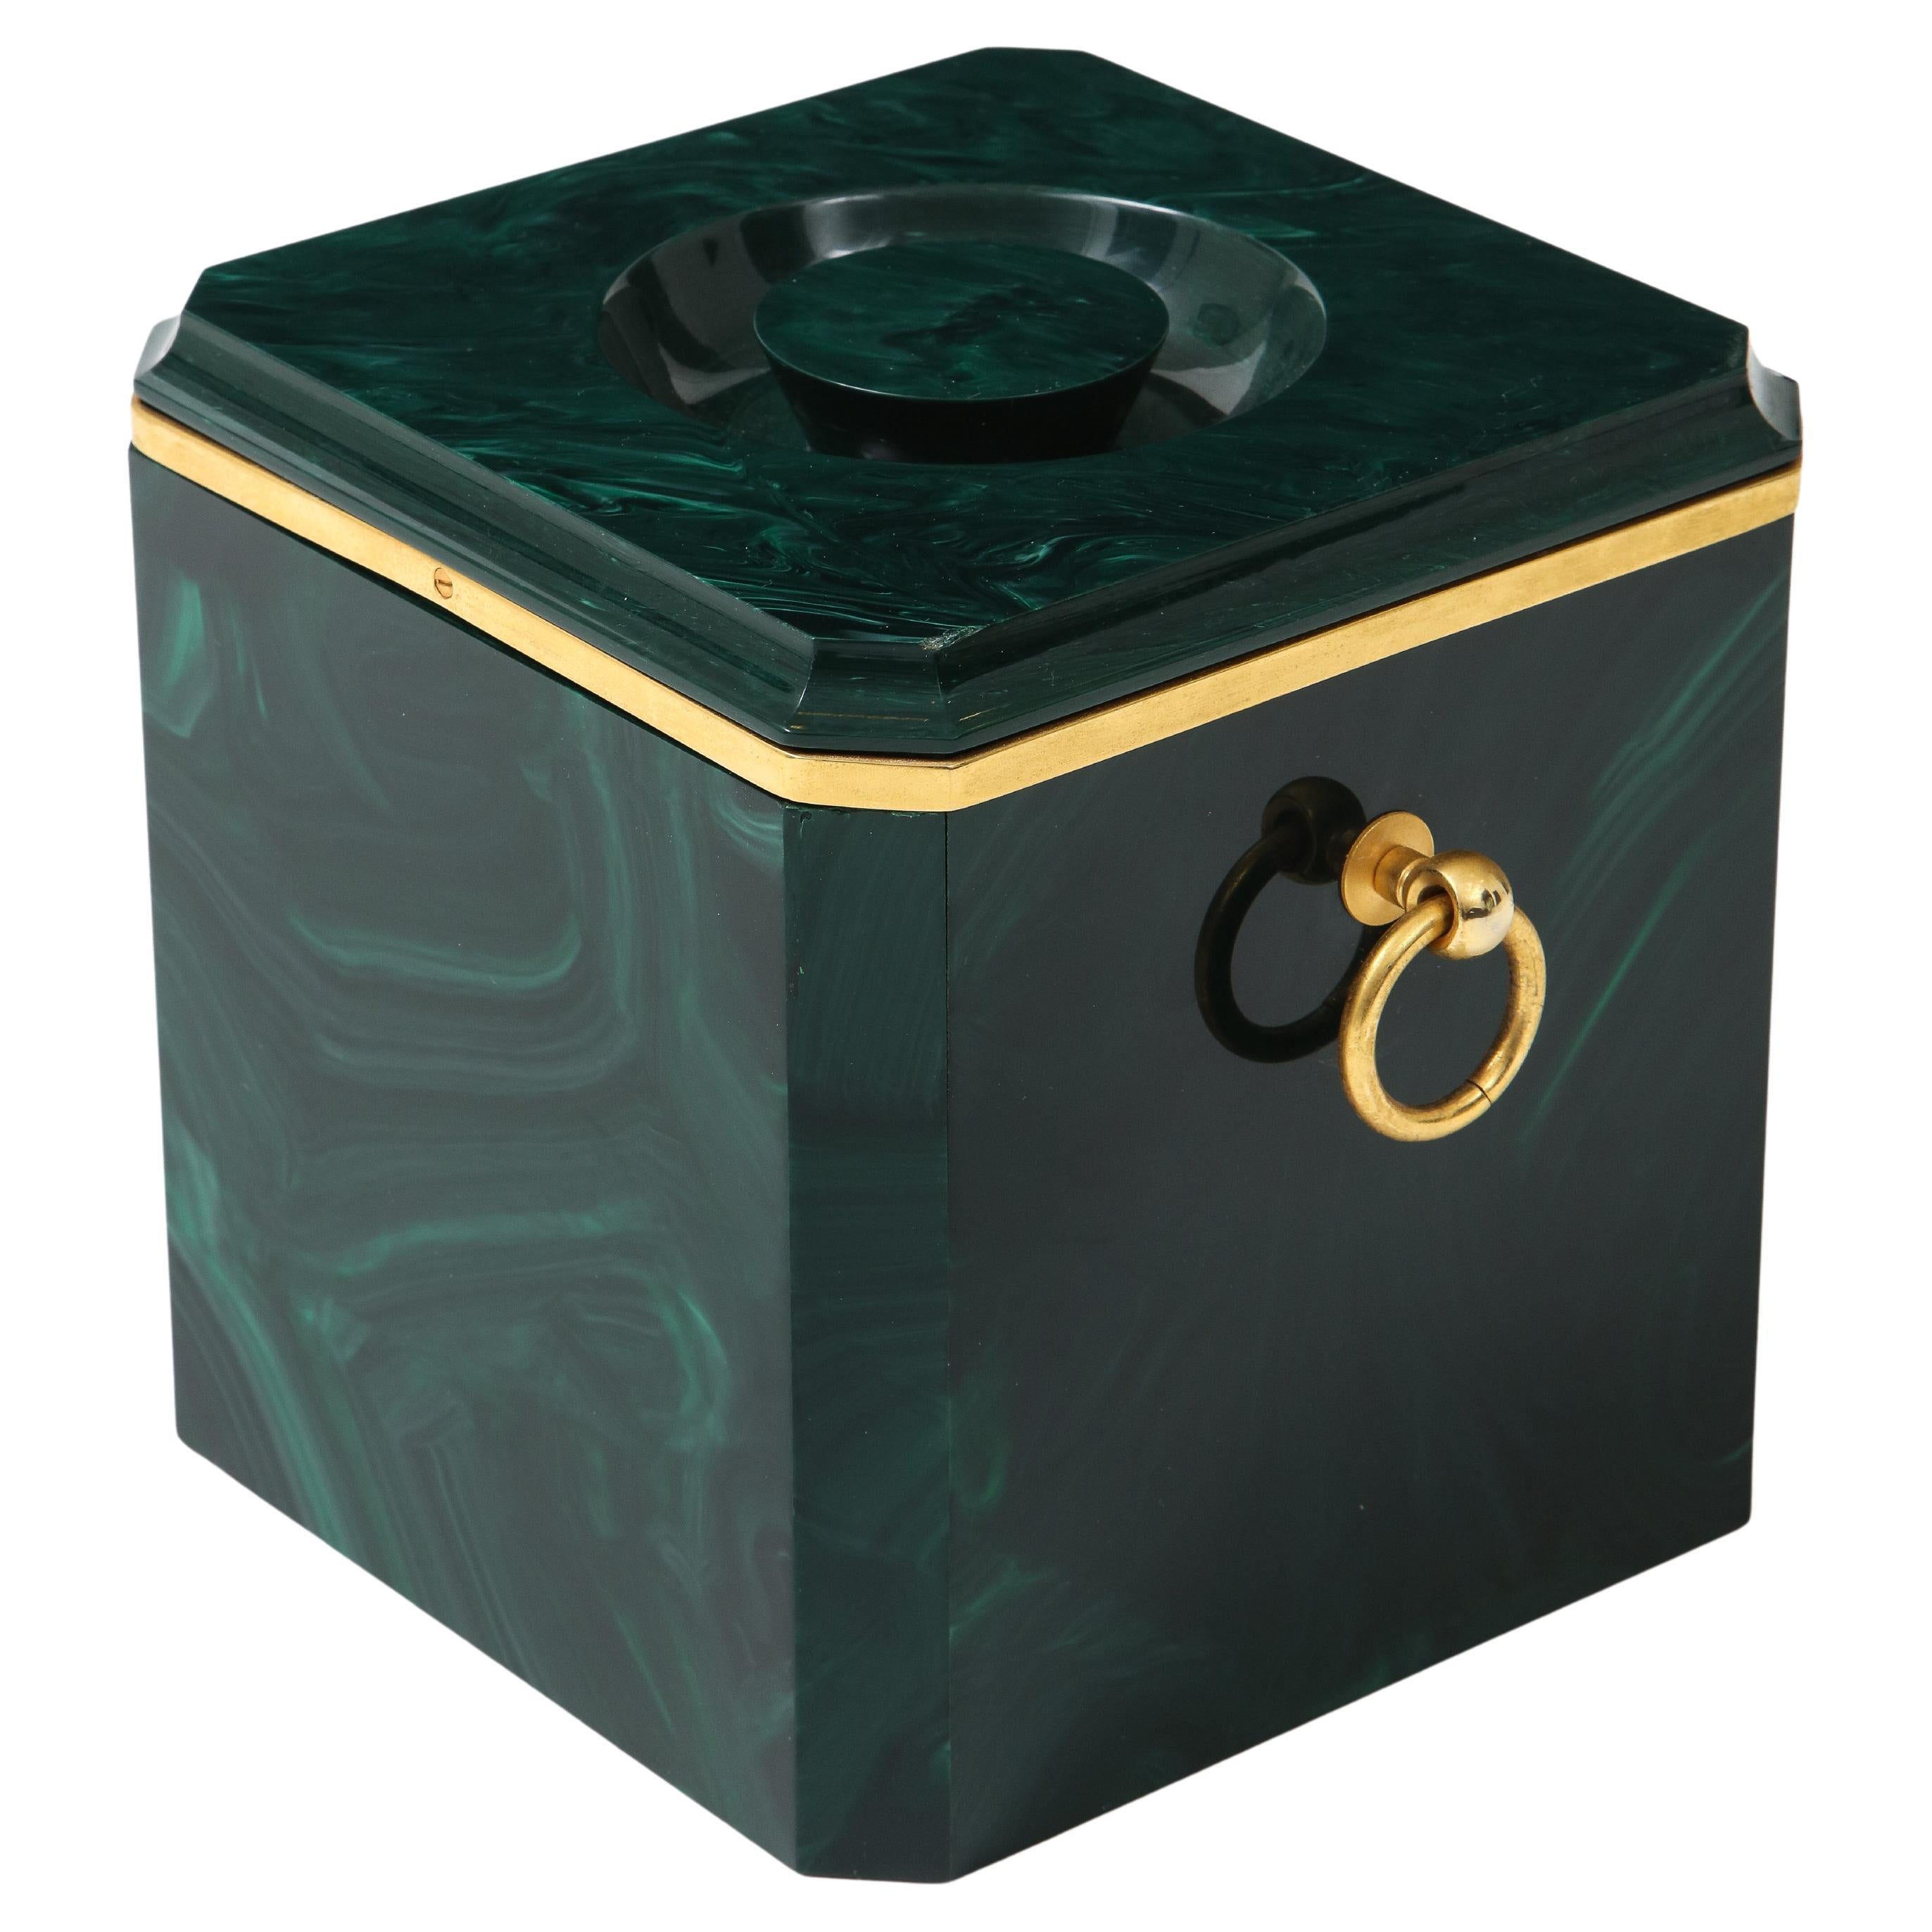 Aldo Tura Faux Malachite Ice Bucket with Brass Rings, Italy, 1970s For Sale